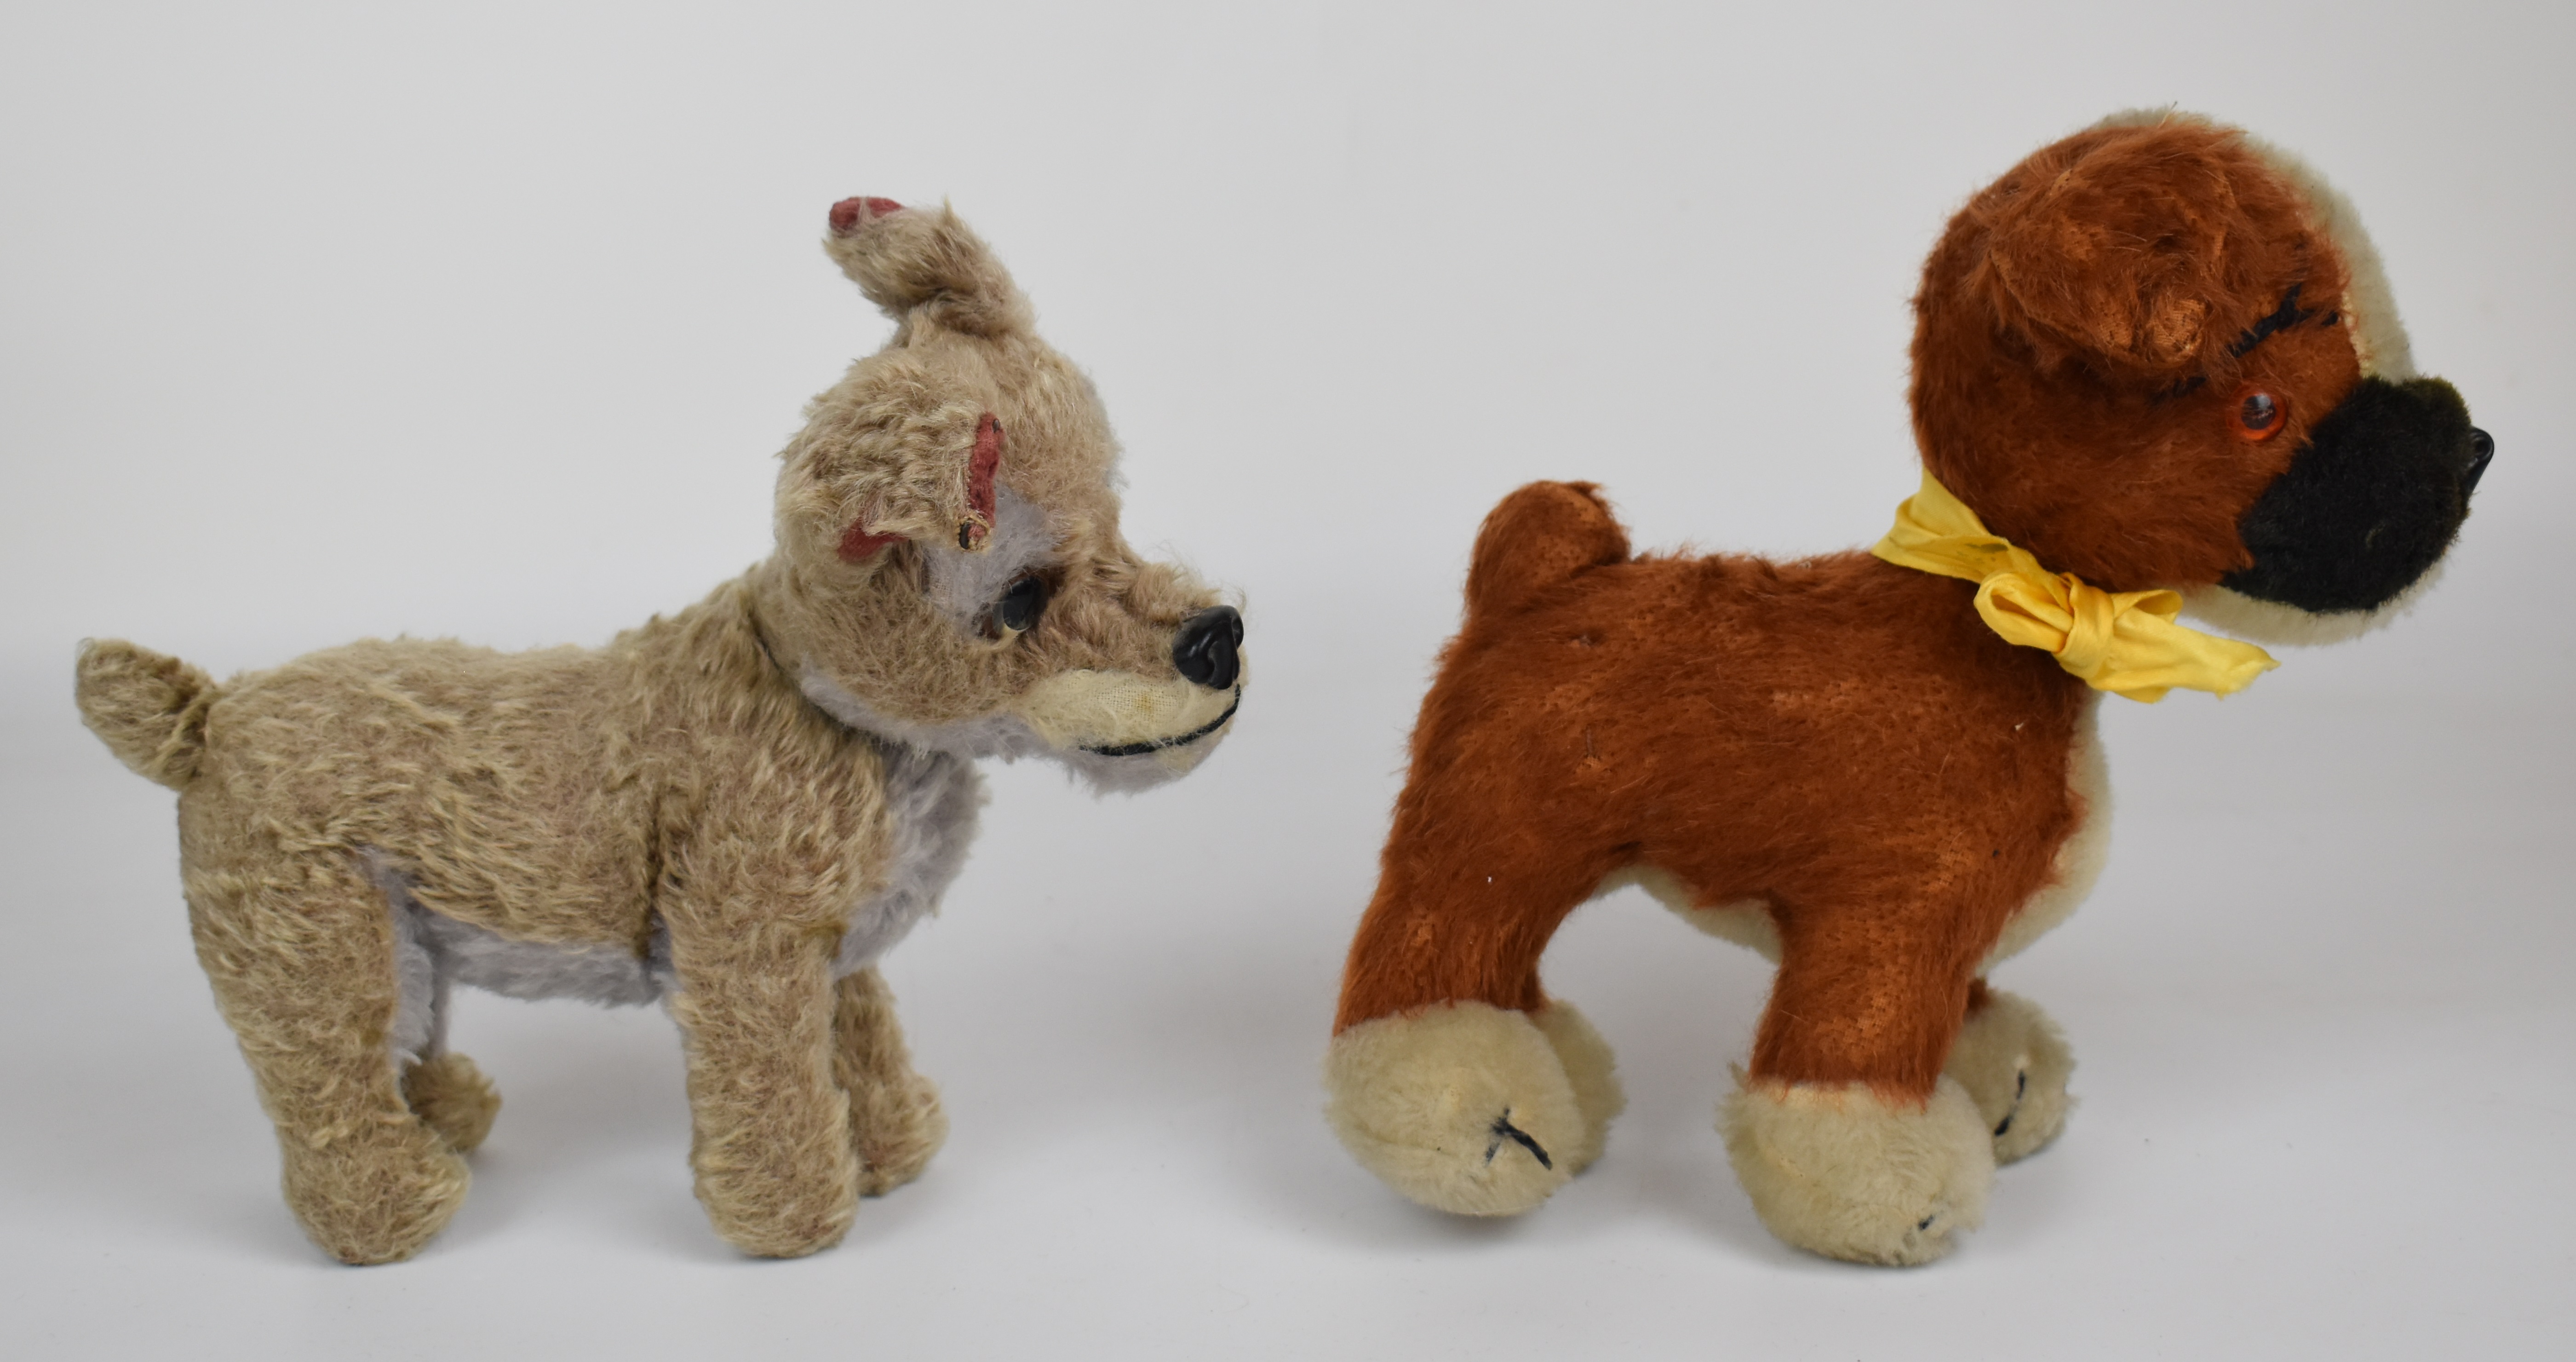 Five vintage Steiff, Merrythought and similar plush toys together with a 1930's celluloid doll in - Image 3 of 5